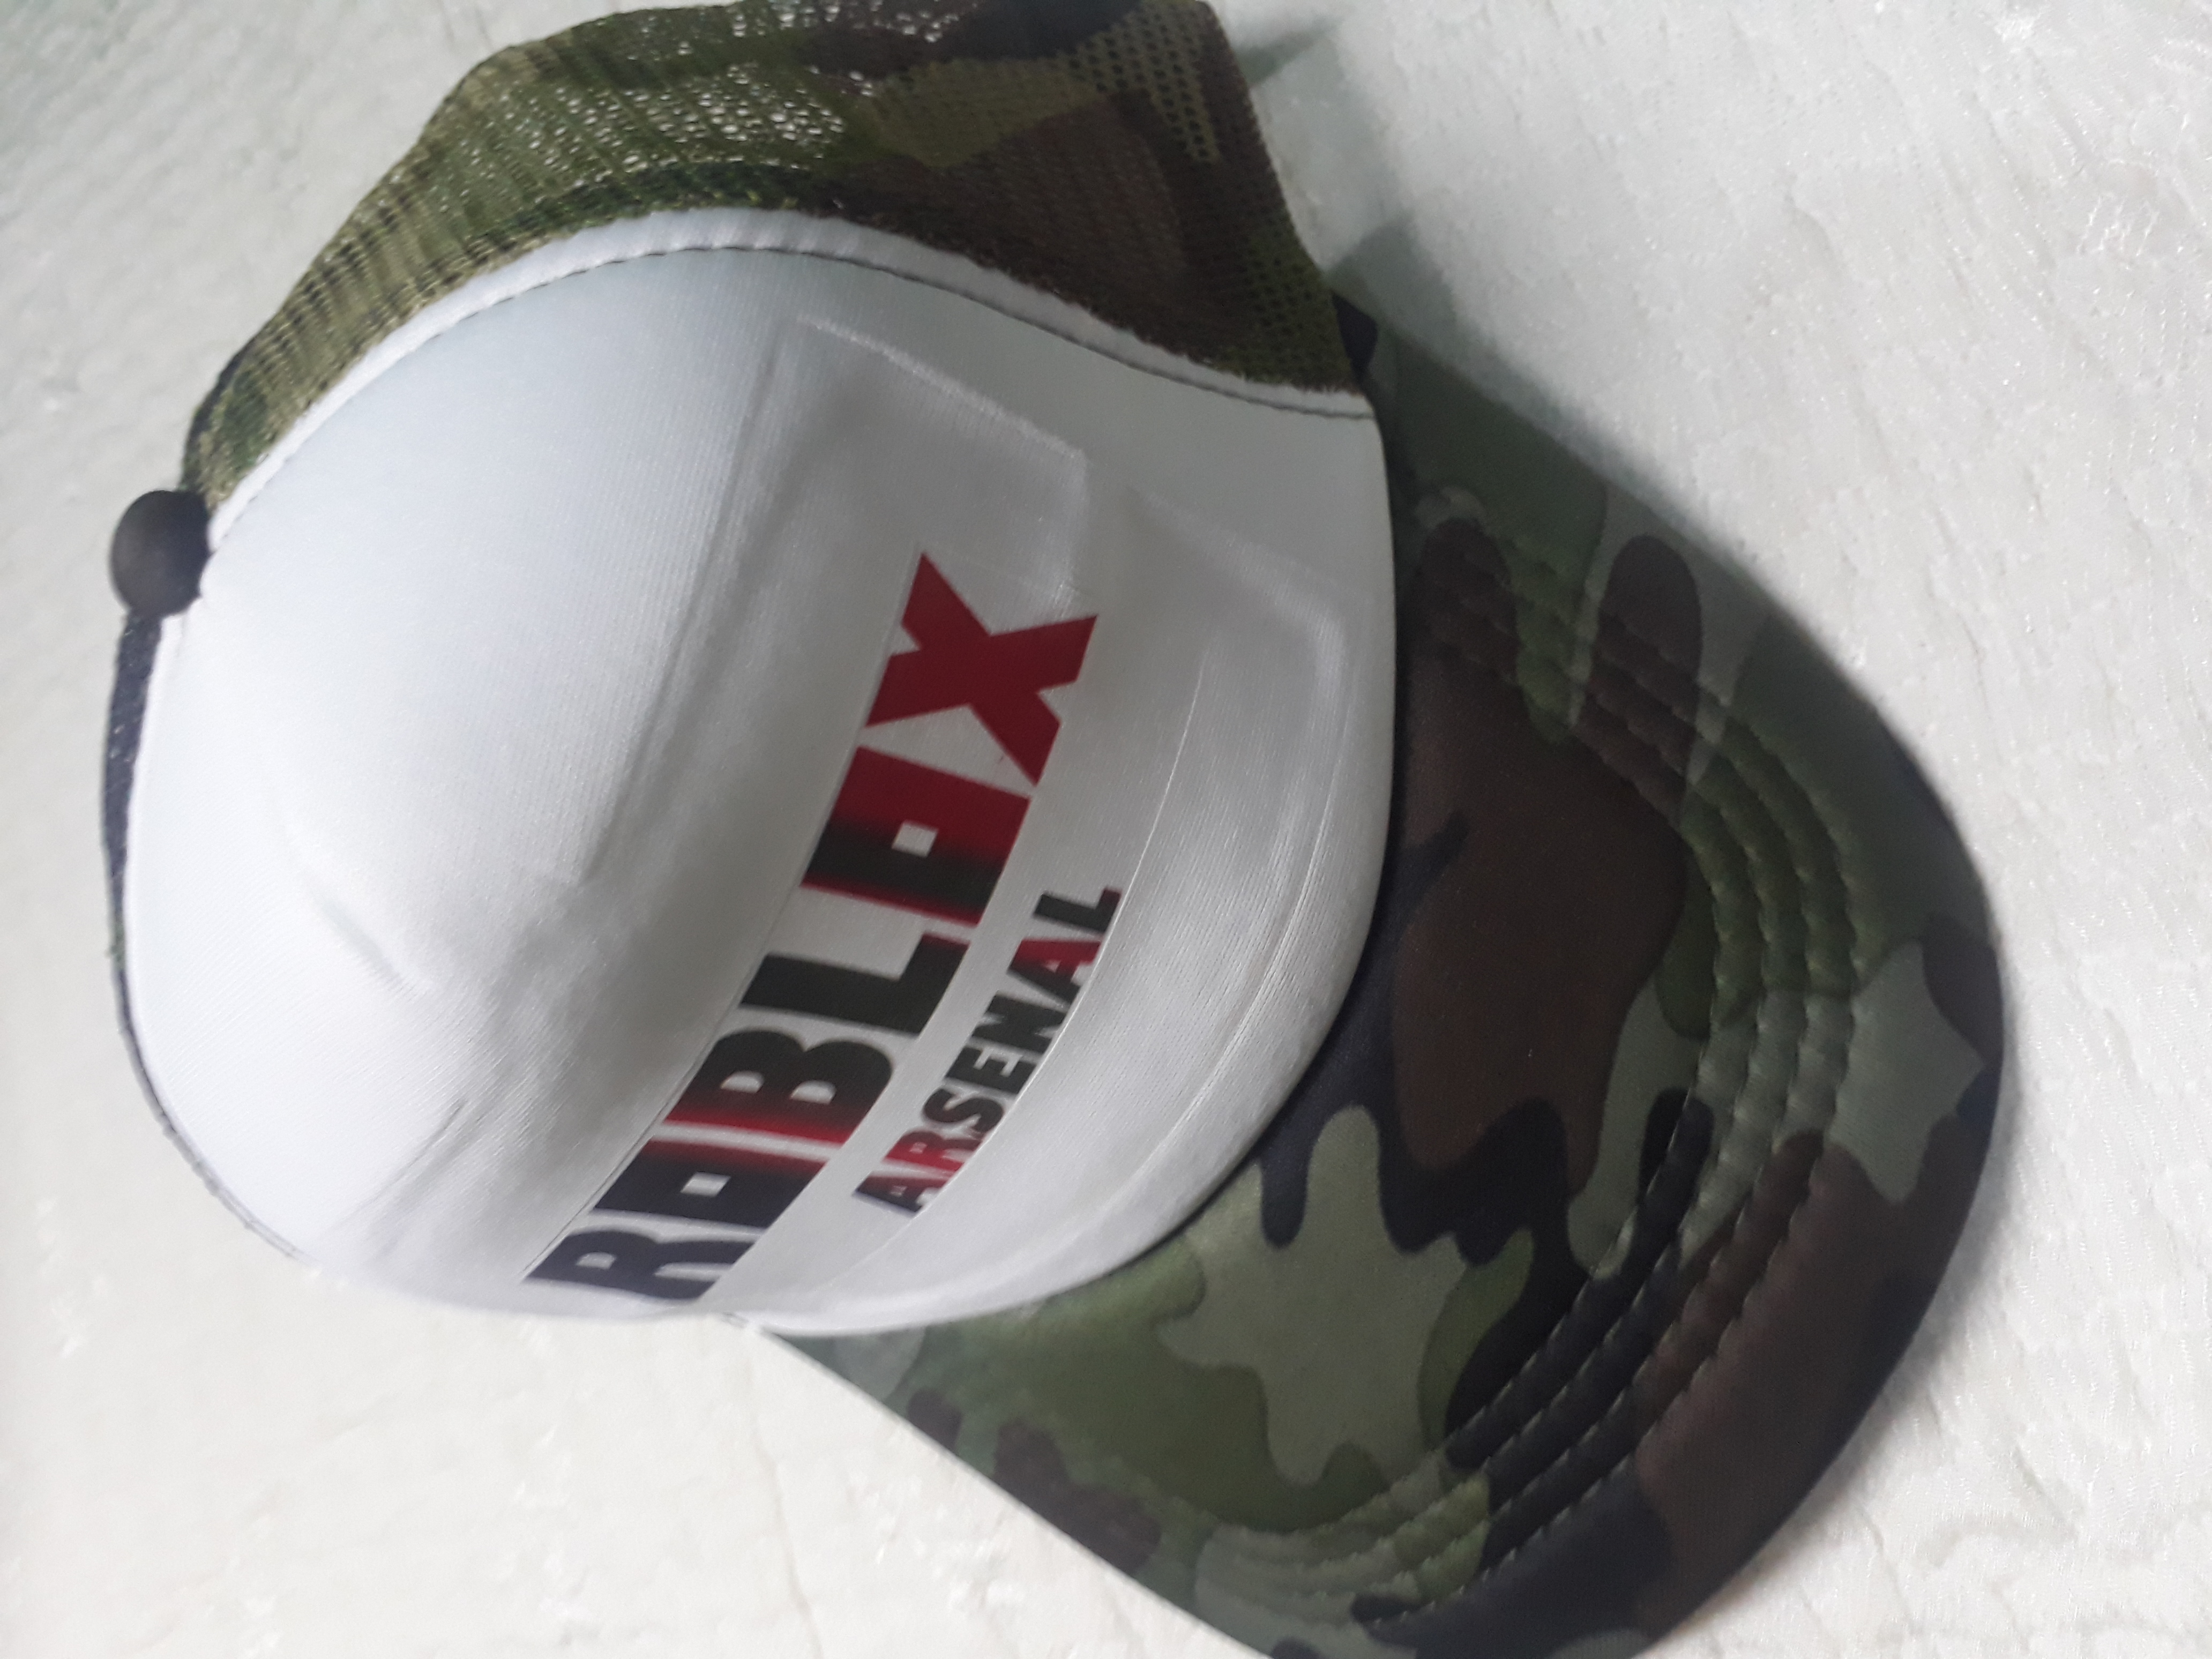 Roblox Military Camoflouge Cap Buy Sell Online Hats Caps With Cheap Price Lazada Ph - ww2 hats roblox